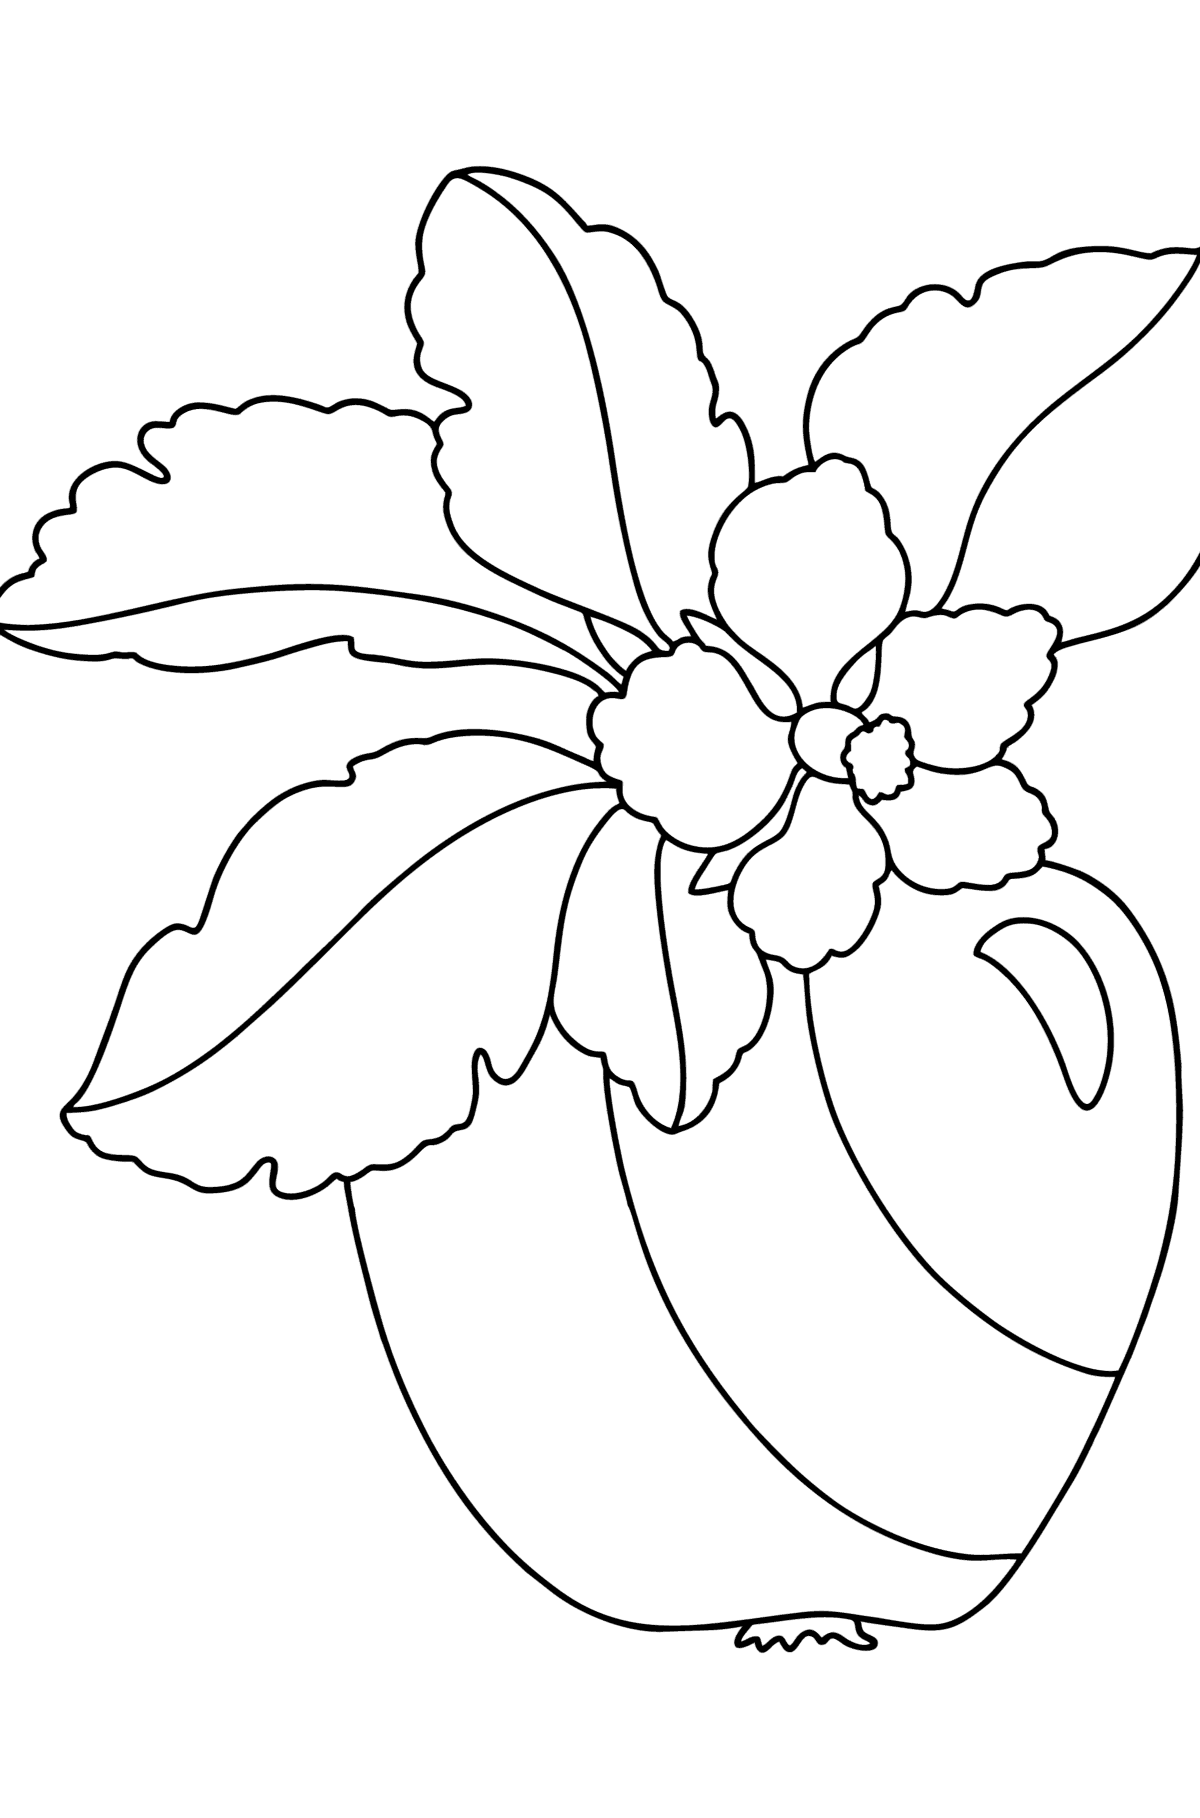 Ripe apple сoloring page - Coloring Pages for Kids